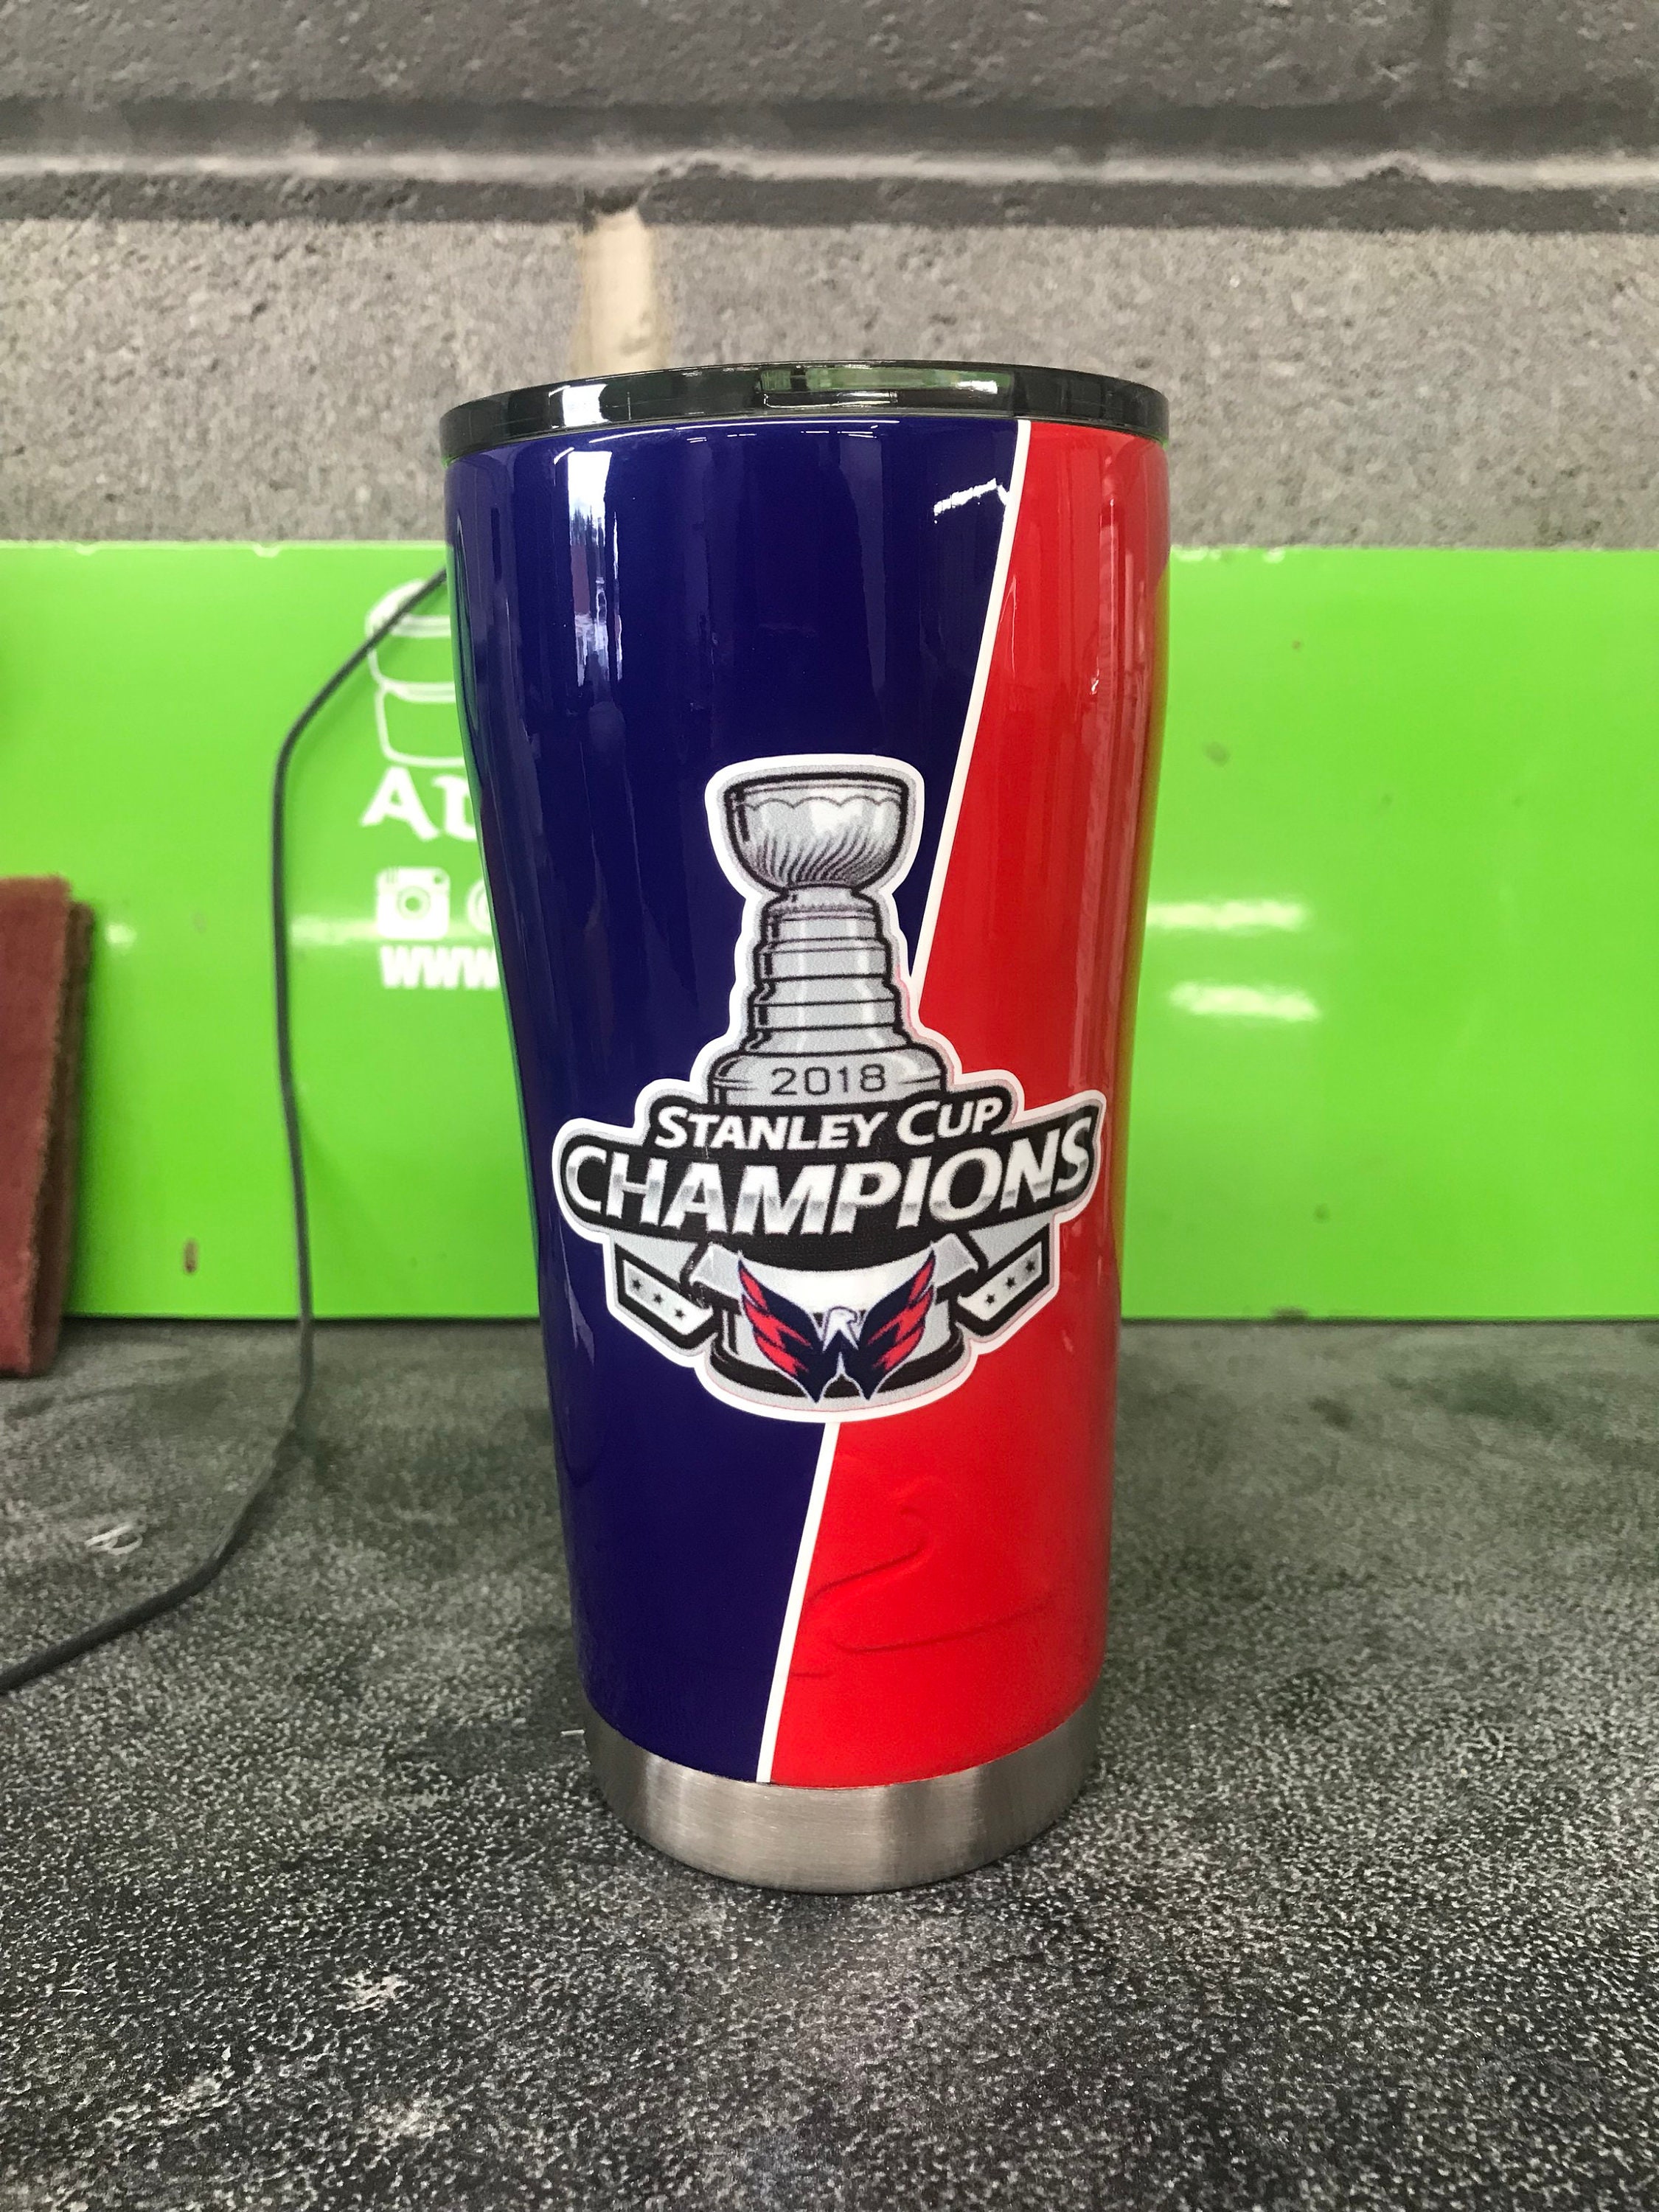 WASHINGTON CAPITALS 2018 Stanley Cup Champions Mini Stanley Cup Trophy